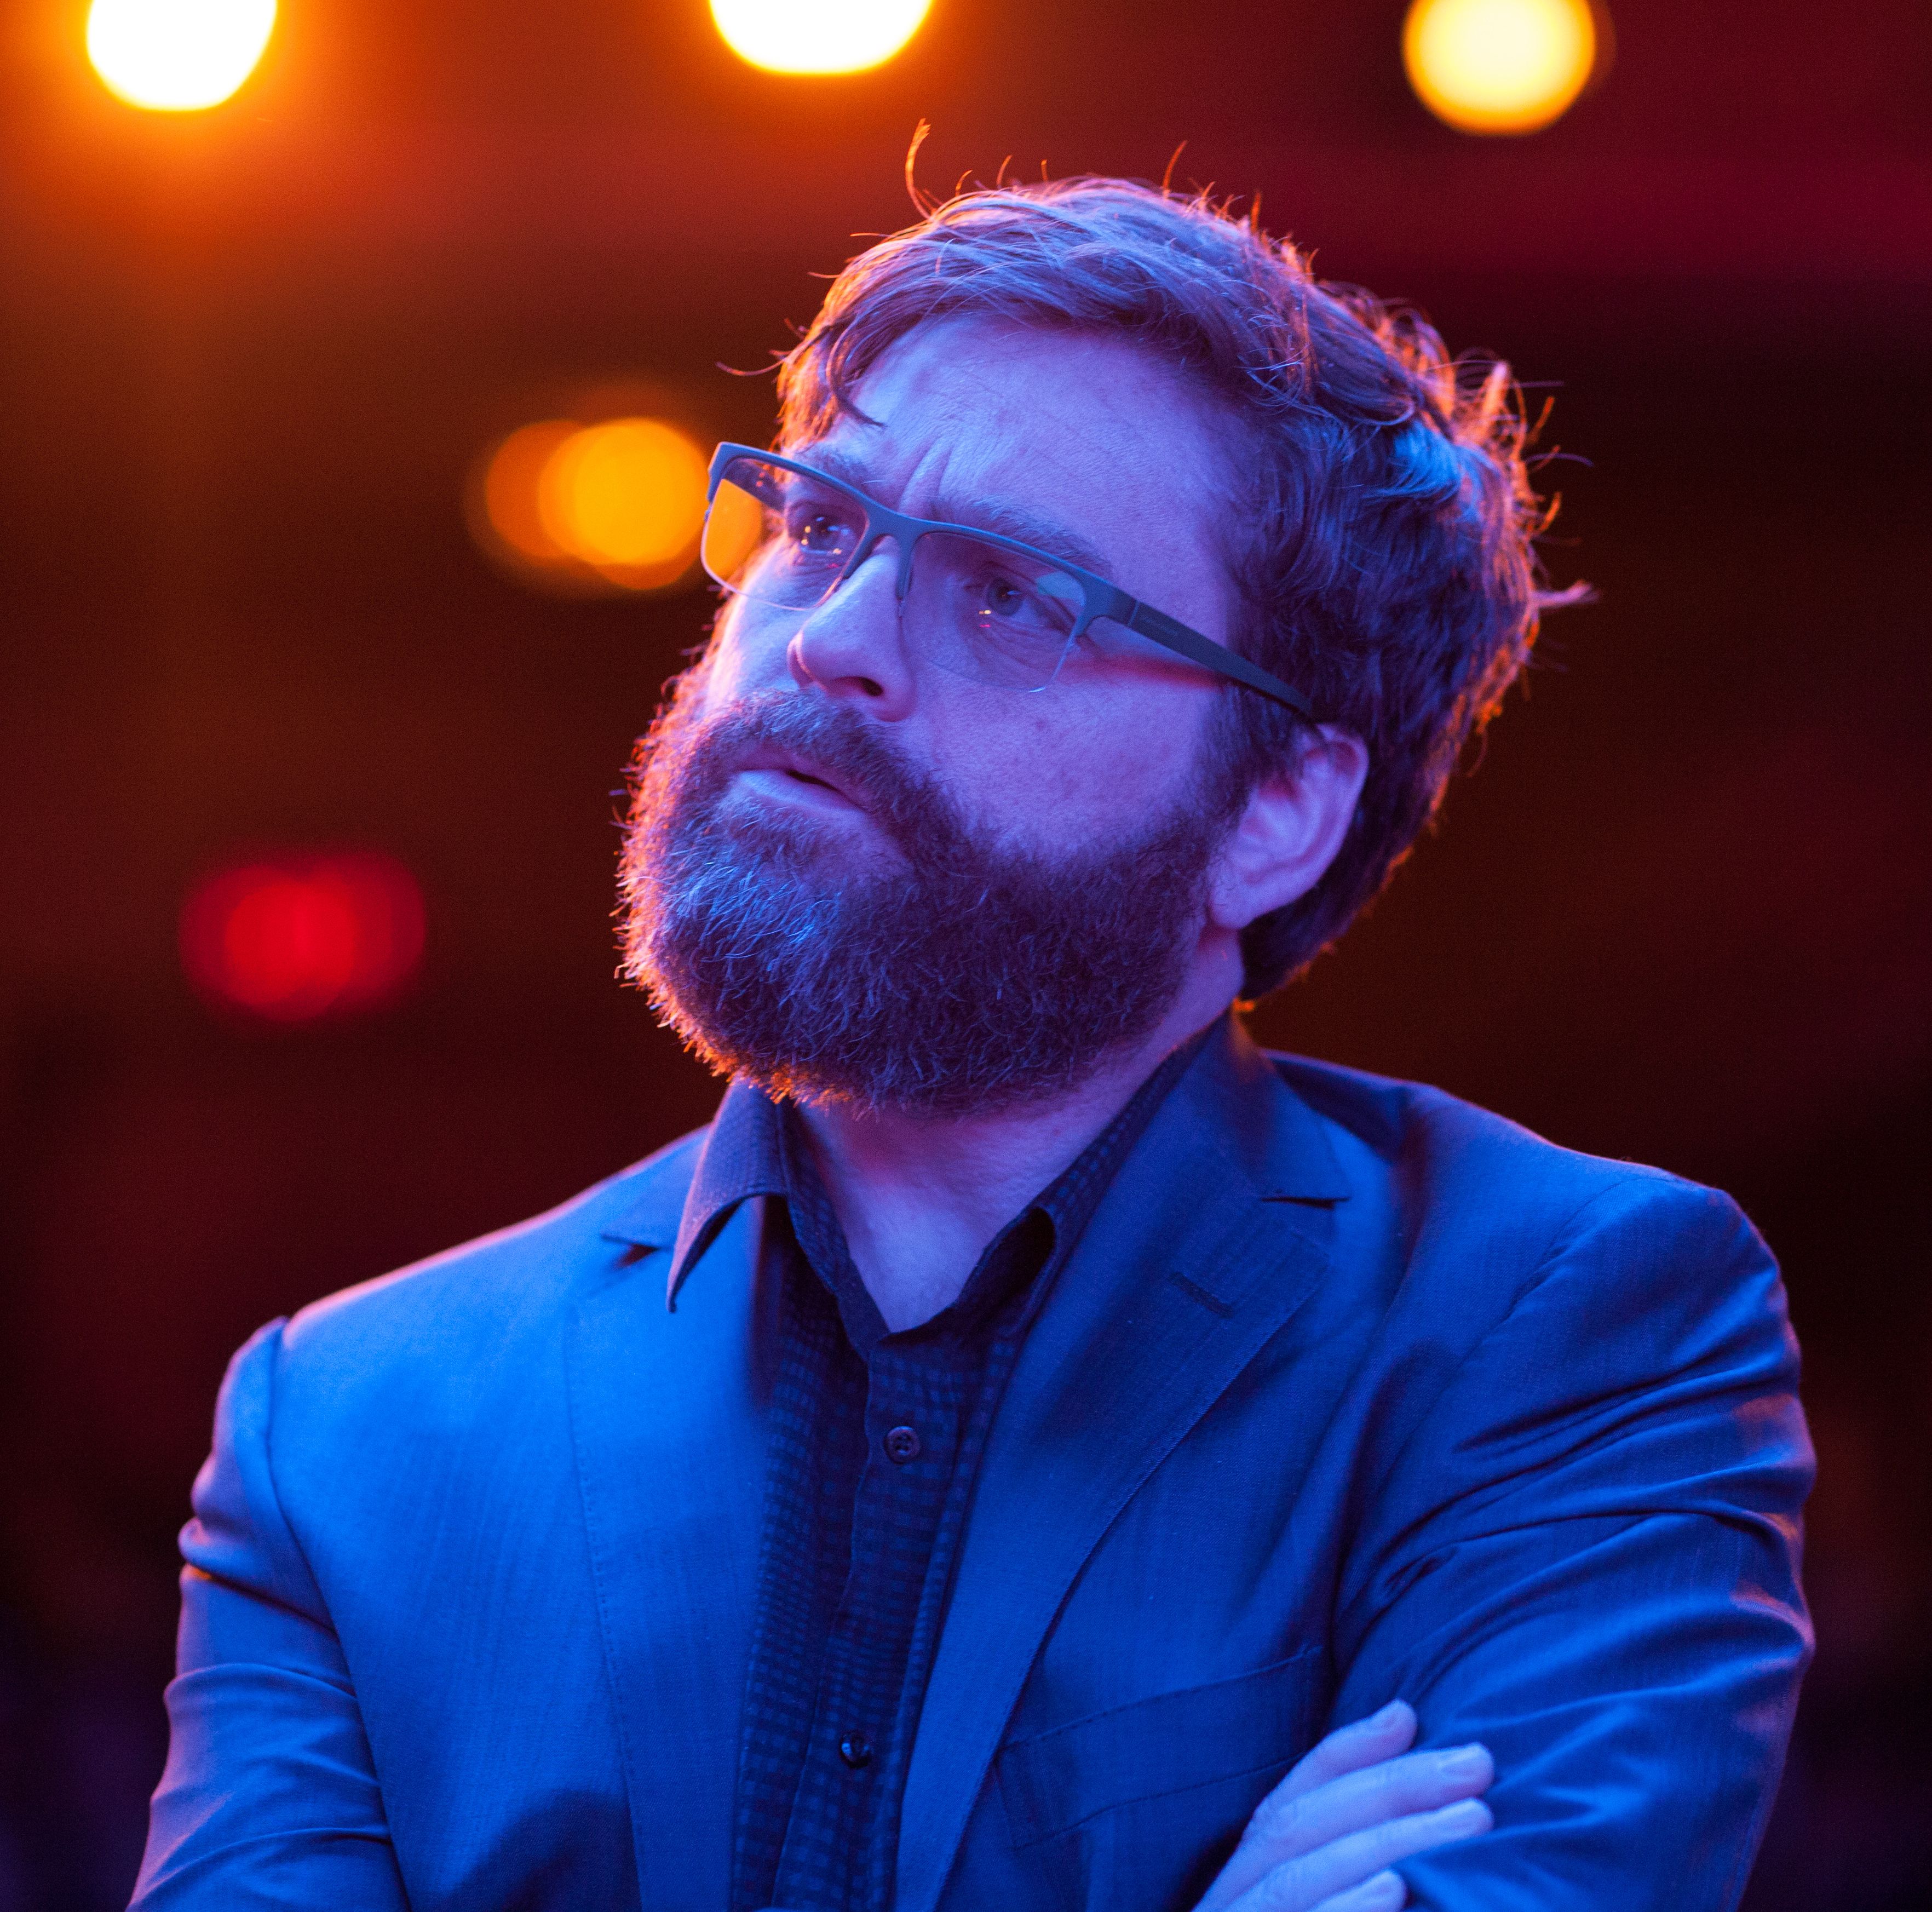 Zach Galifianakis as Jake looking bright on stage